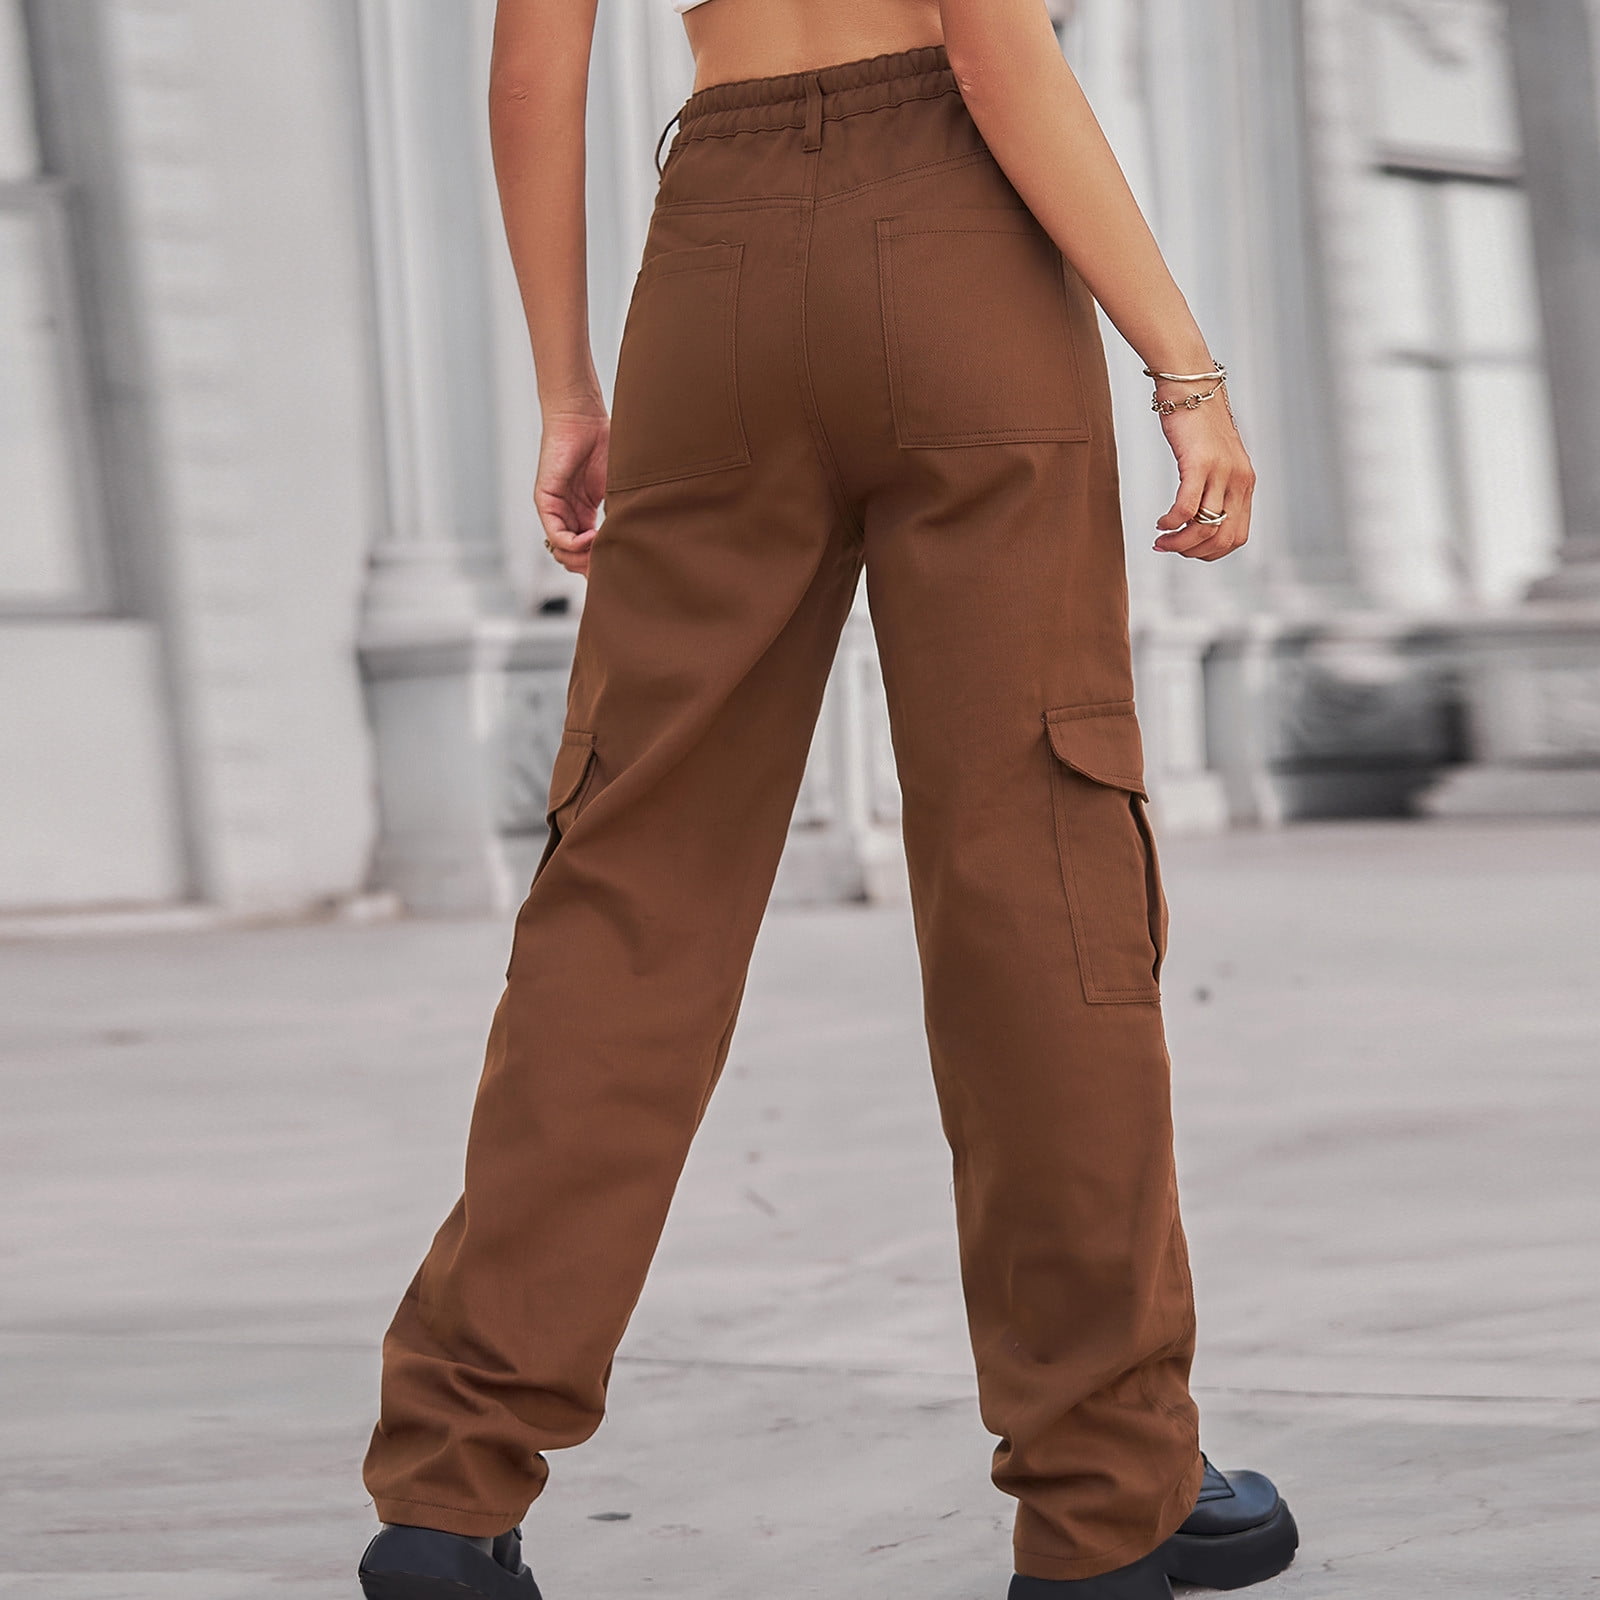 Gaecuw Cargo Pants Women Baggy Jeans Regular Fit Long Pants Button Up  Lounge Trousers Pants Loose Baggy Jeans Mid Waisted Denim Summer Ankle  Length Pants with Pockets Straight Leg Solid Denim Pants 